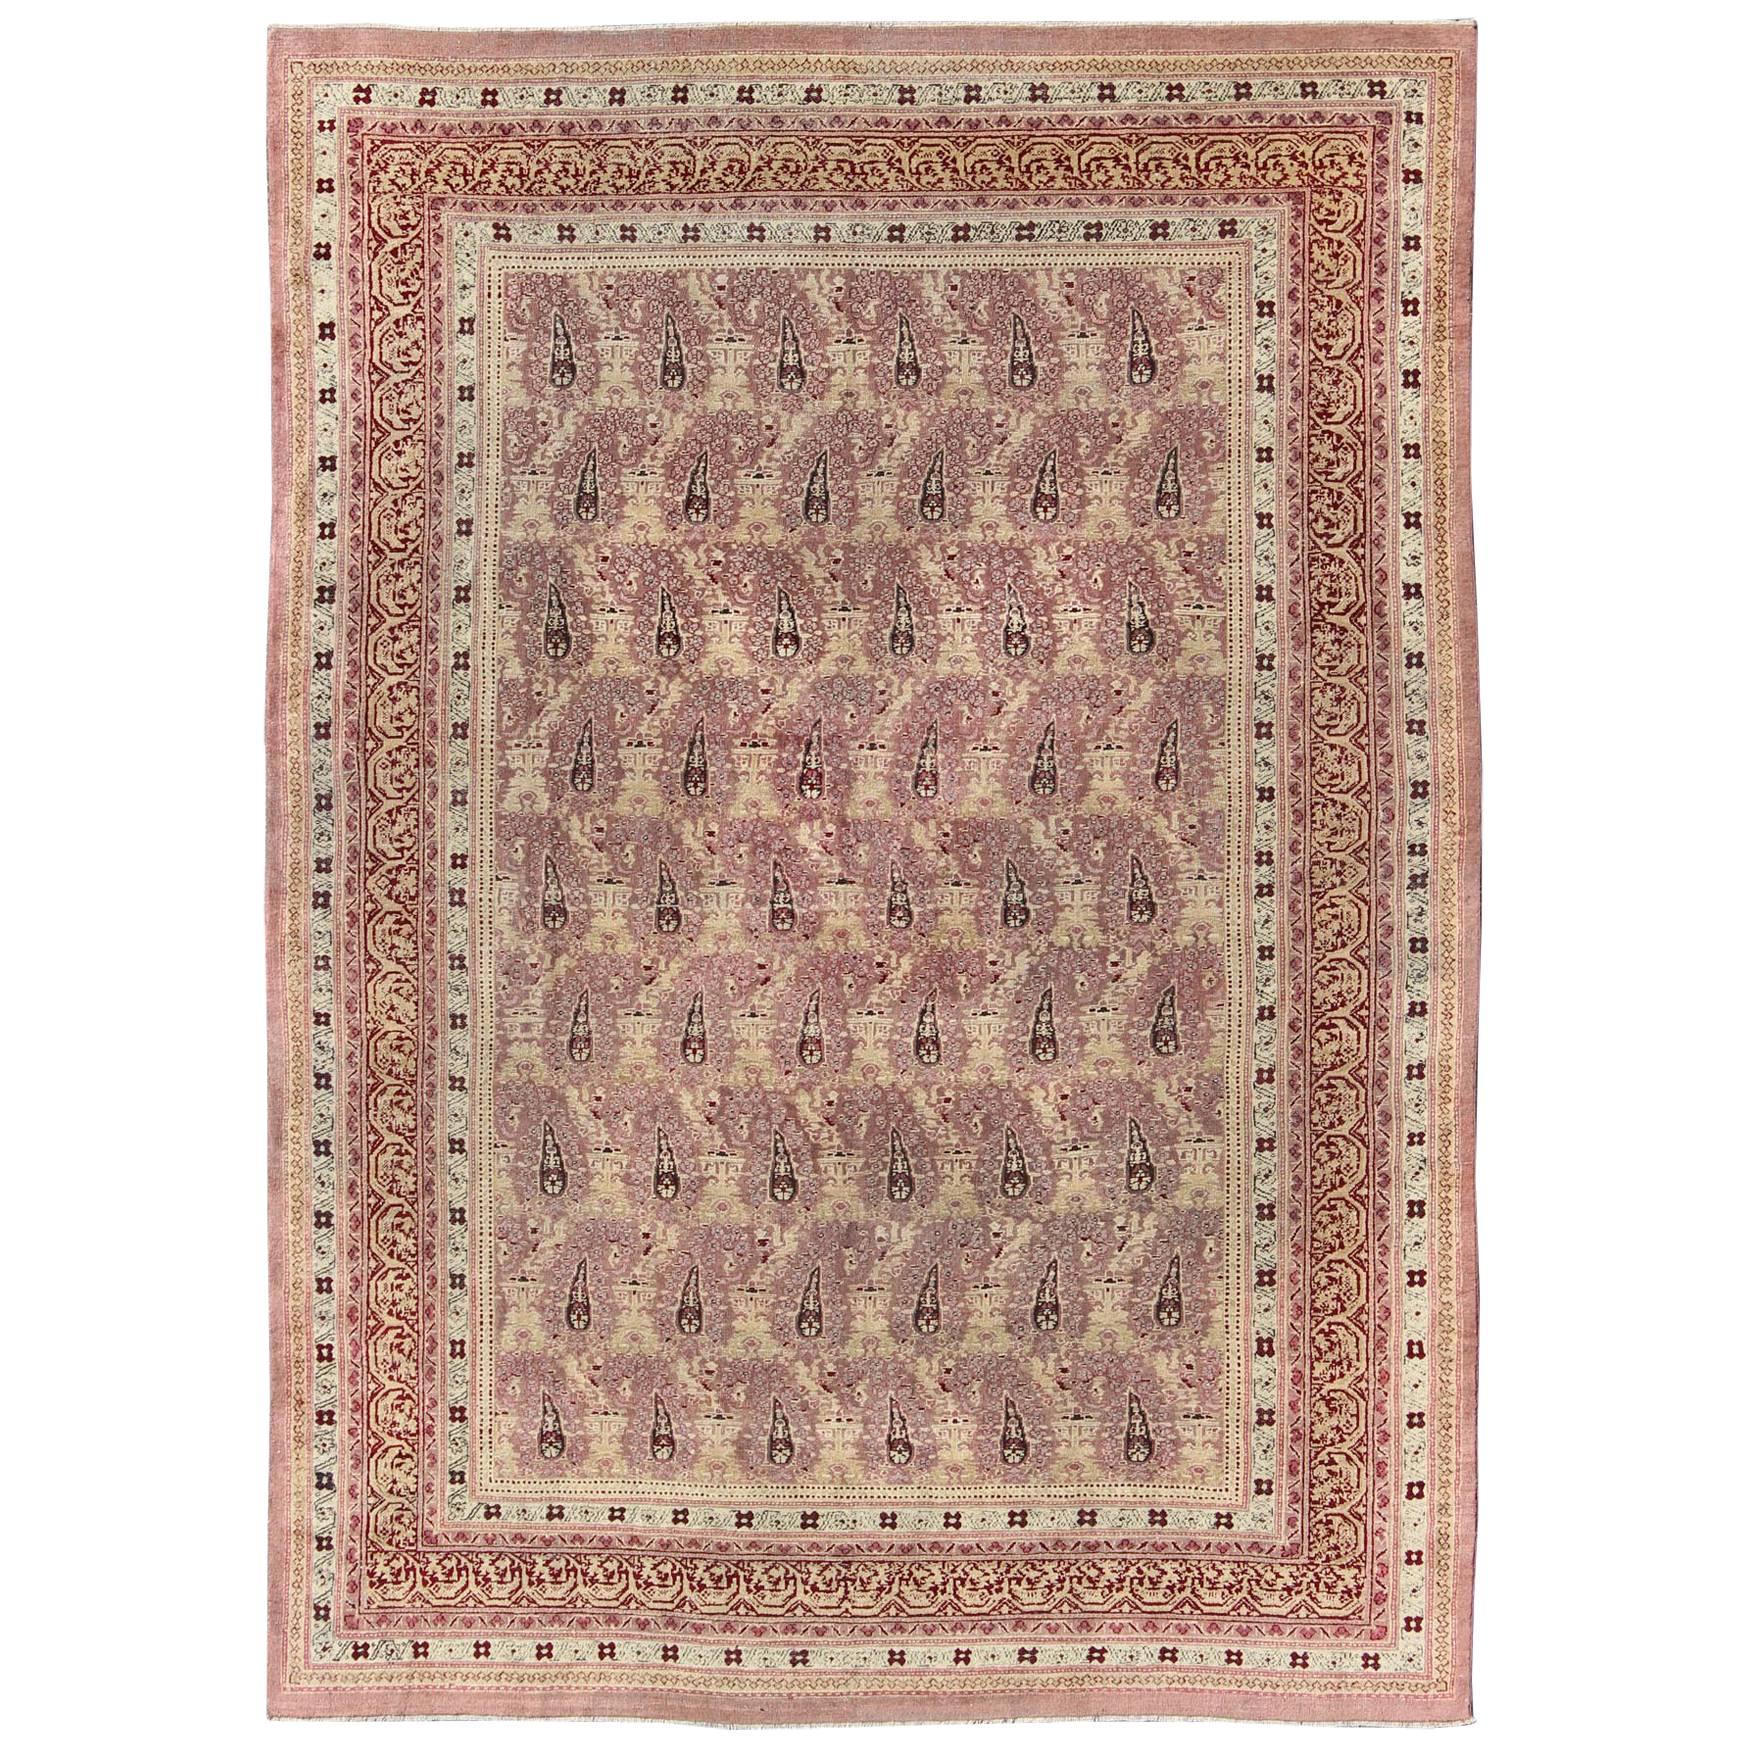 Antique Amritsar Rug with Paisley Pattern in, Lavender, Purple, Pink & Yellow For Sale